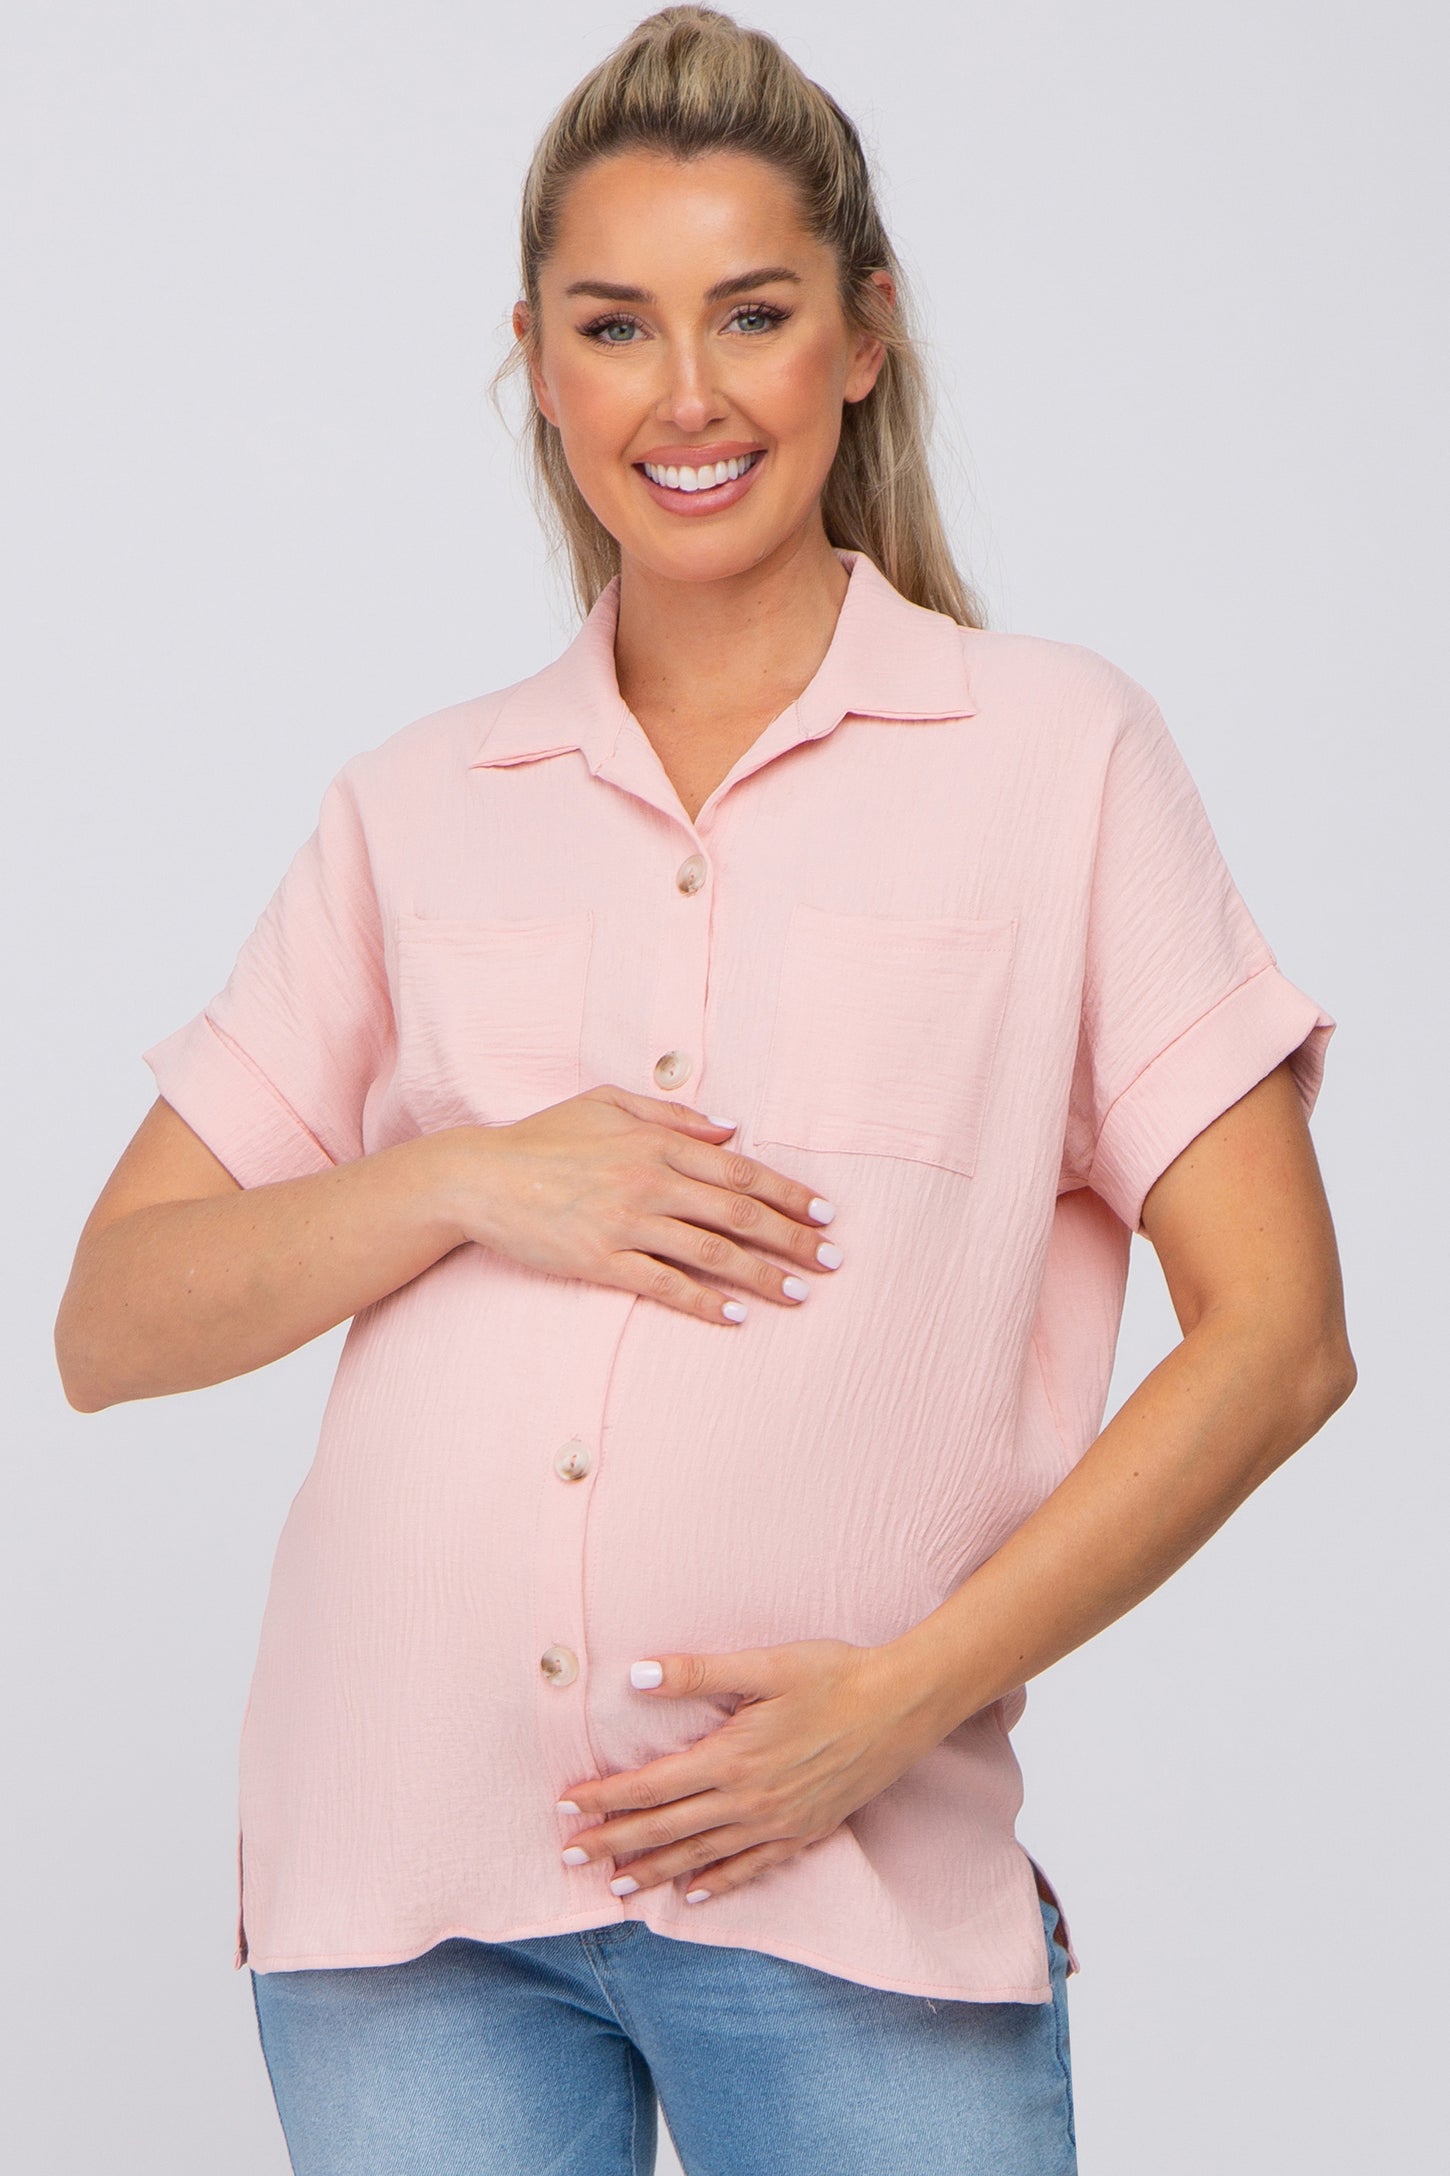 uddrag aIDS Fortrolig Pink Collared Button-Down Short Sleeve Maternity Blouse – PinkBlush